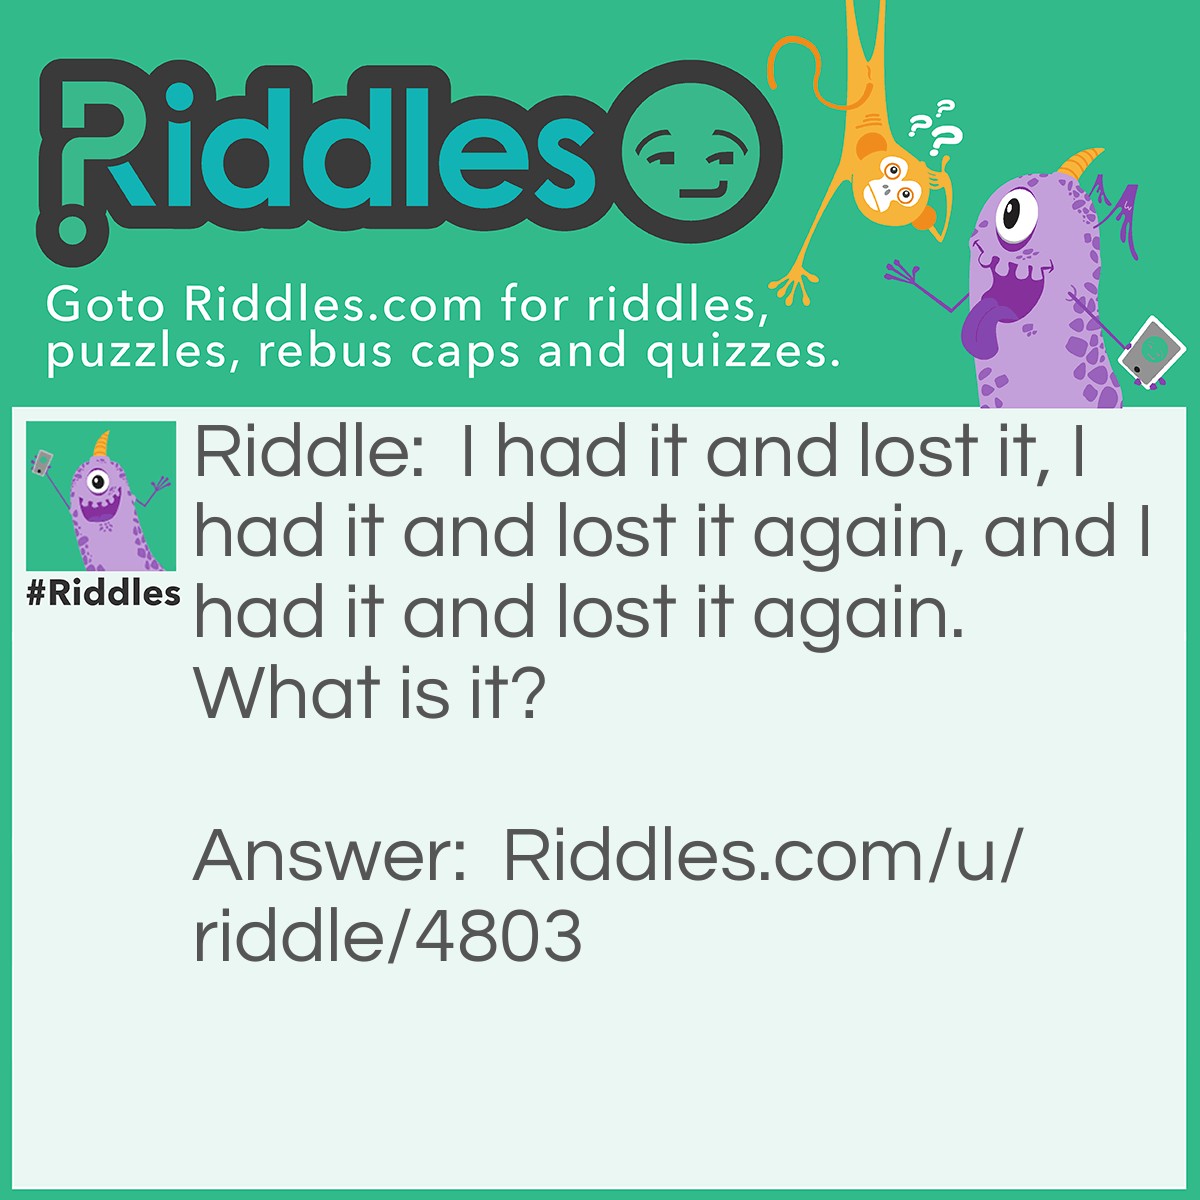 Riddle: I had it and lost it, I had it and lost it again, and I had it and lost it again. What is it? Answer: Things in your short-term memory.